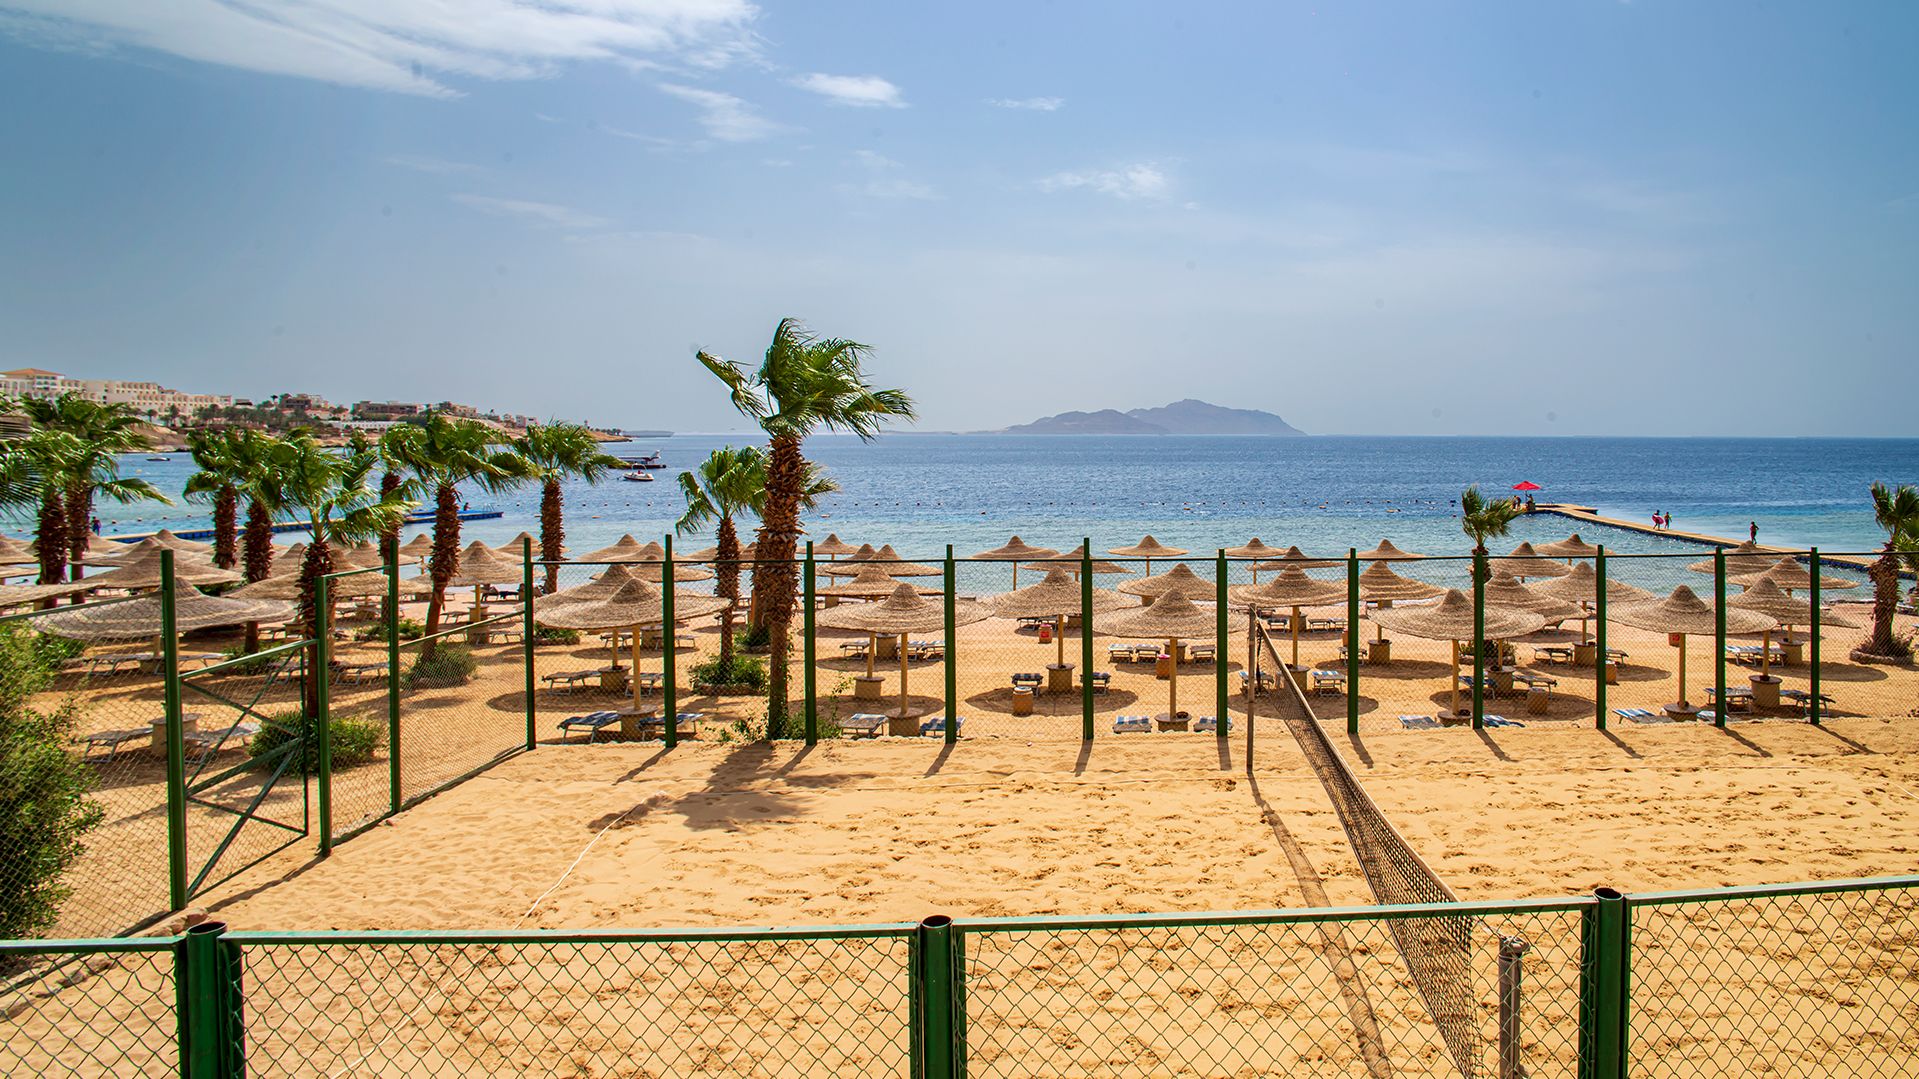 A Beach With Palm Trees And A Fence